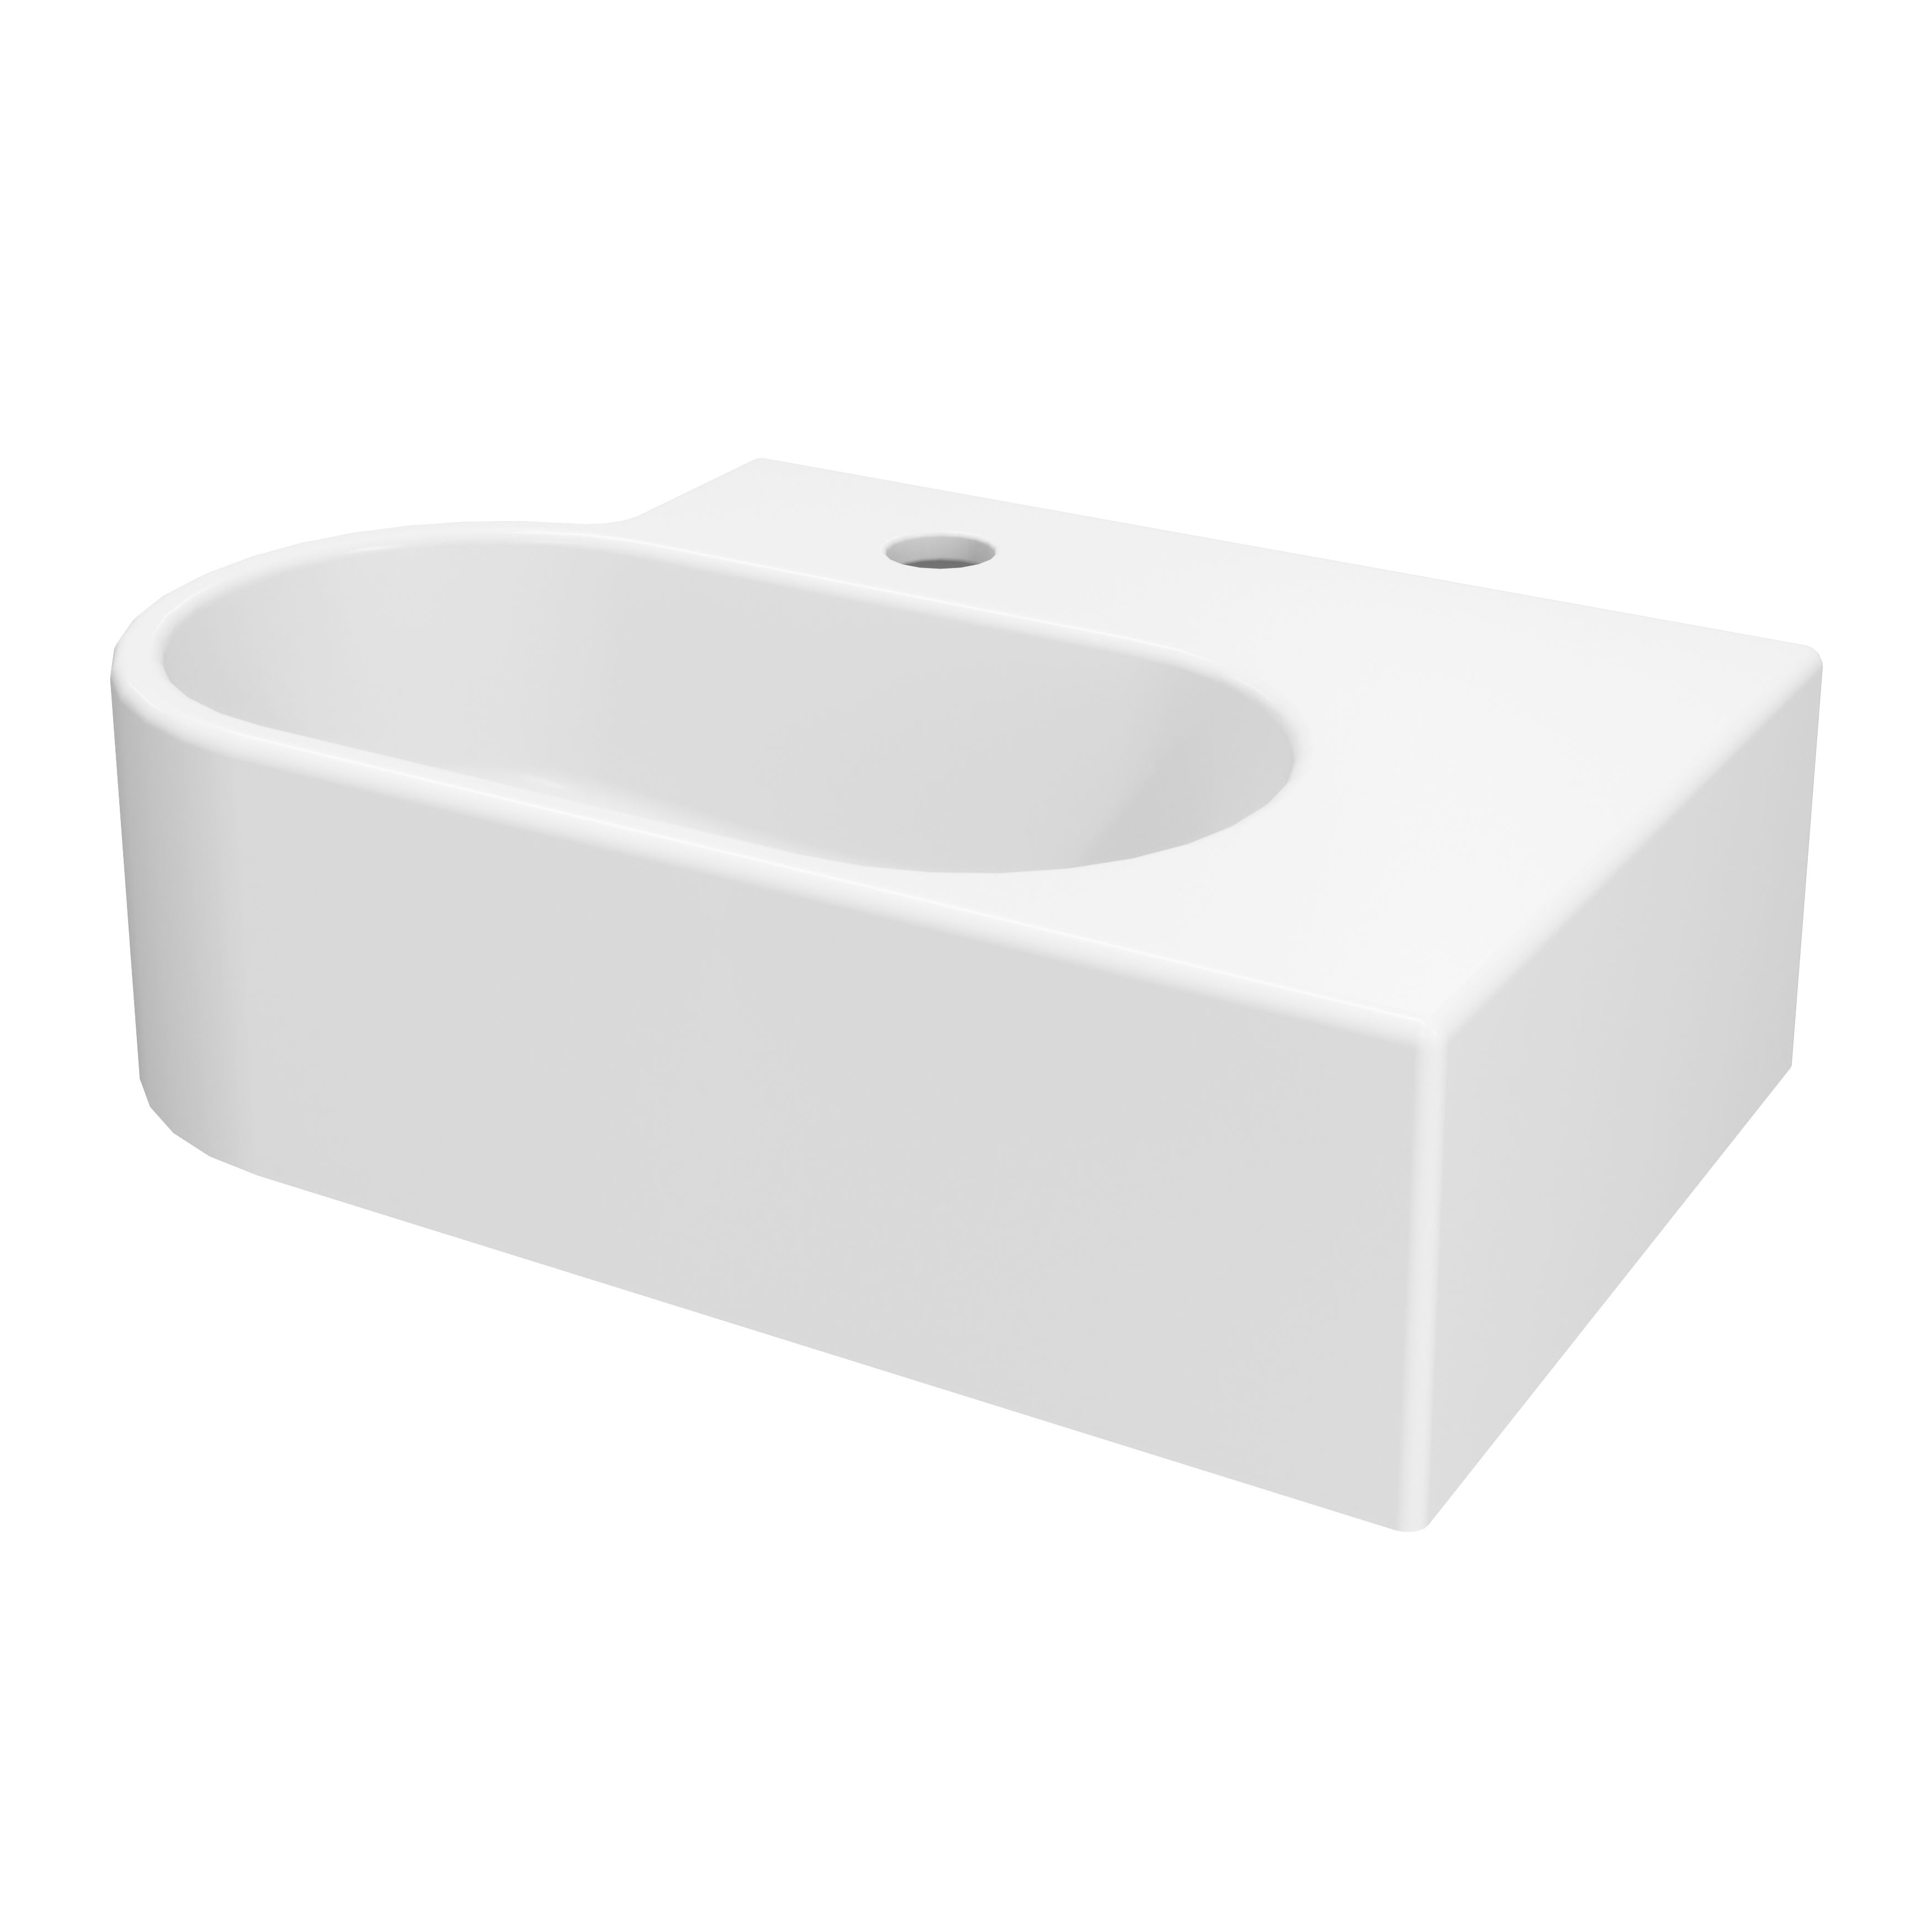 GoodHome Levanna Gloss White Rectangular Wall-mounted Cloakroom Basin (W)47.3cm